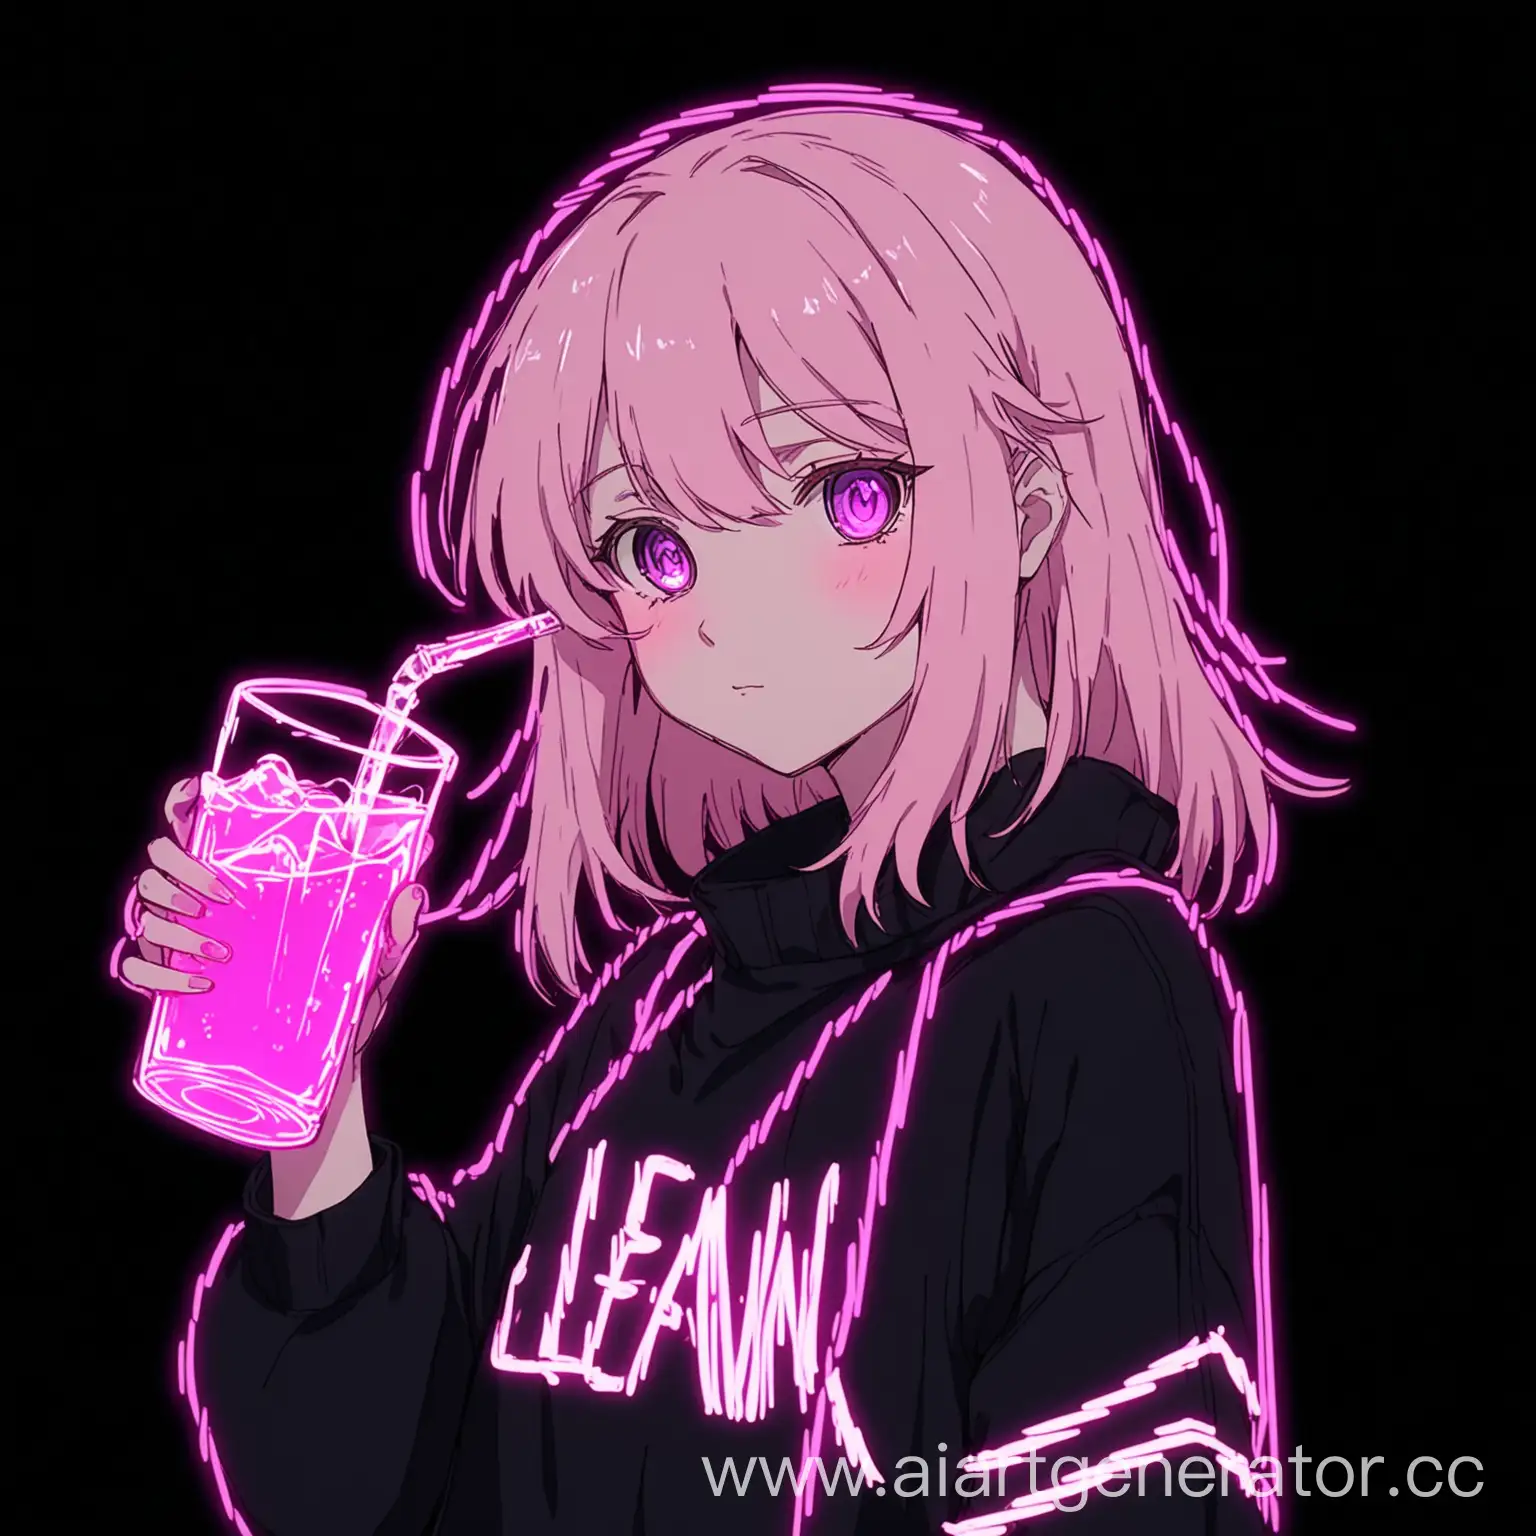 Anime-Girl-Holding-Purple-Drink-on-Black-Background-with-Pink-Neon-Outline